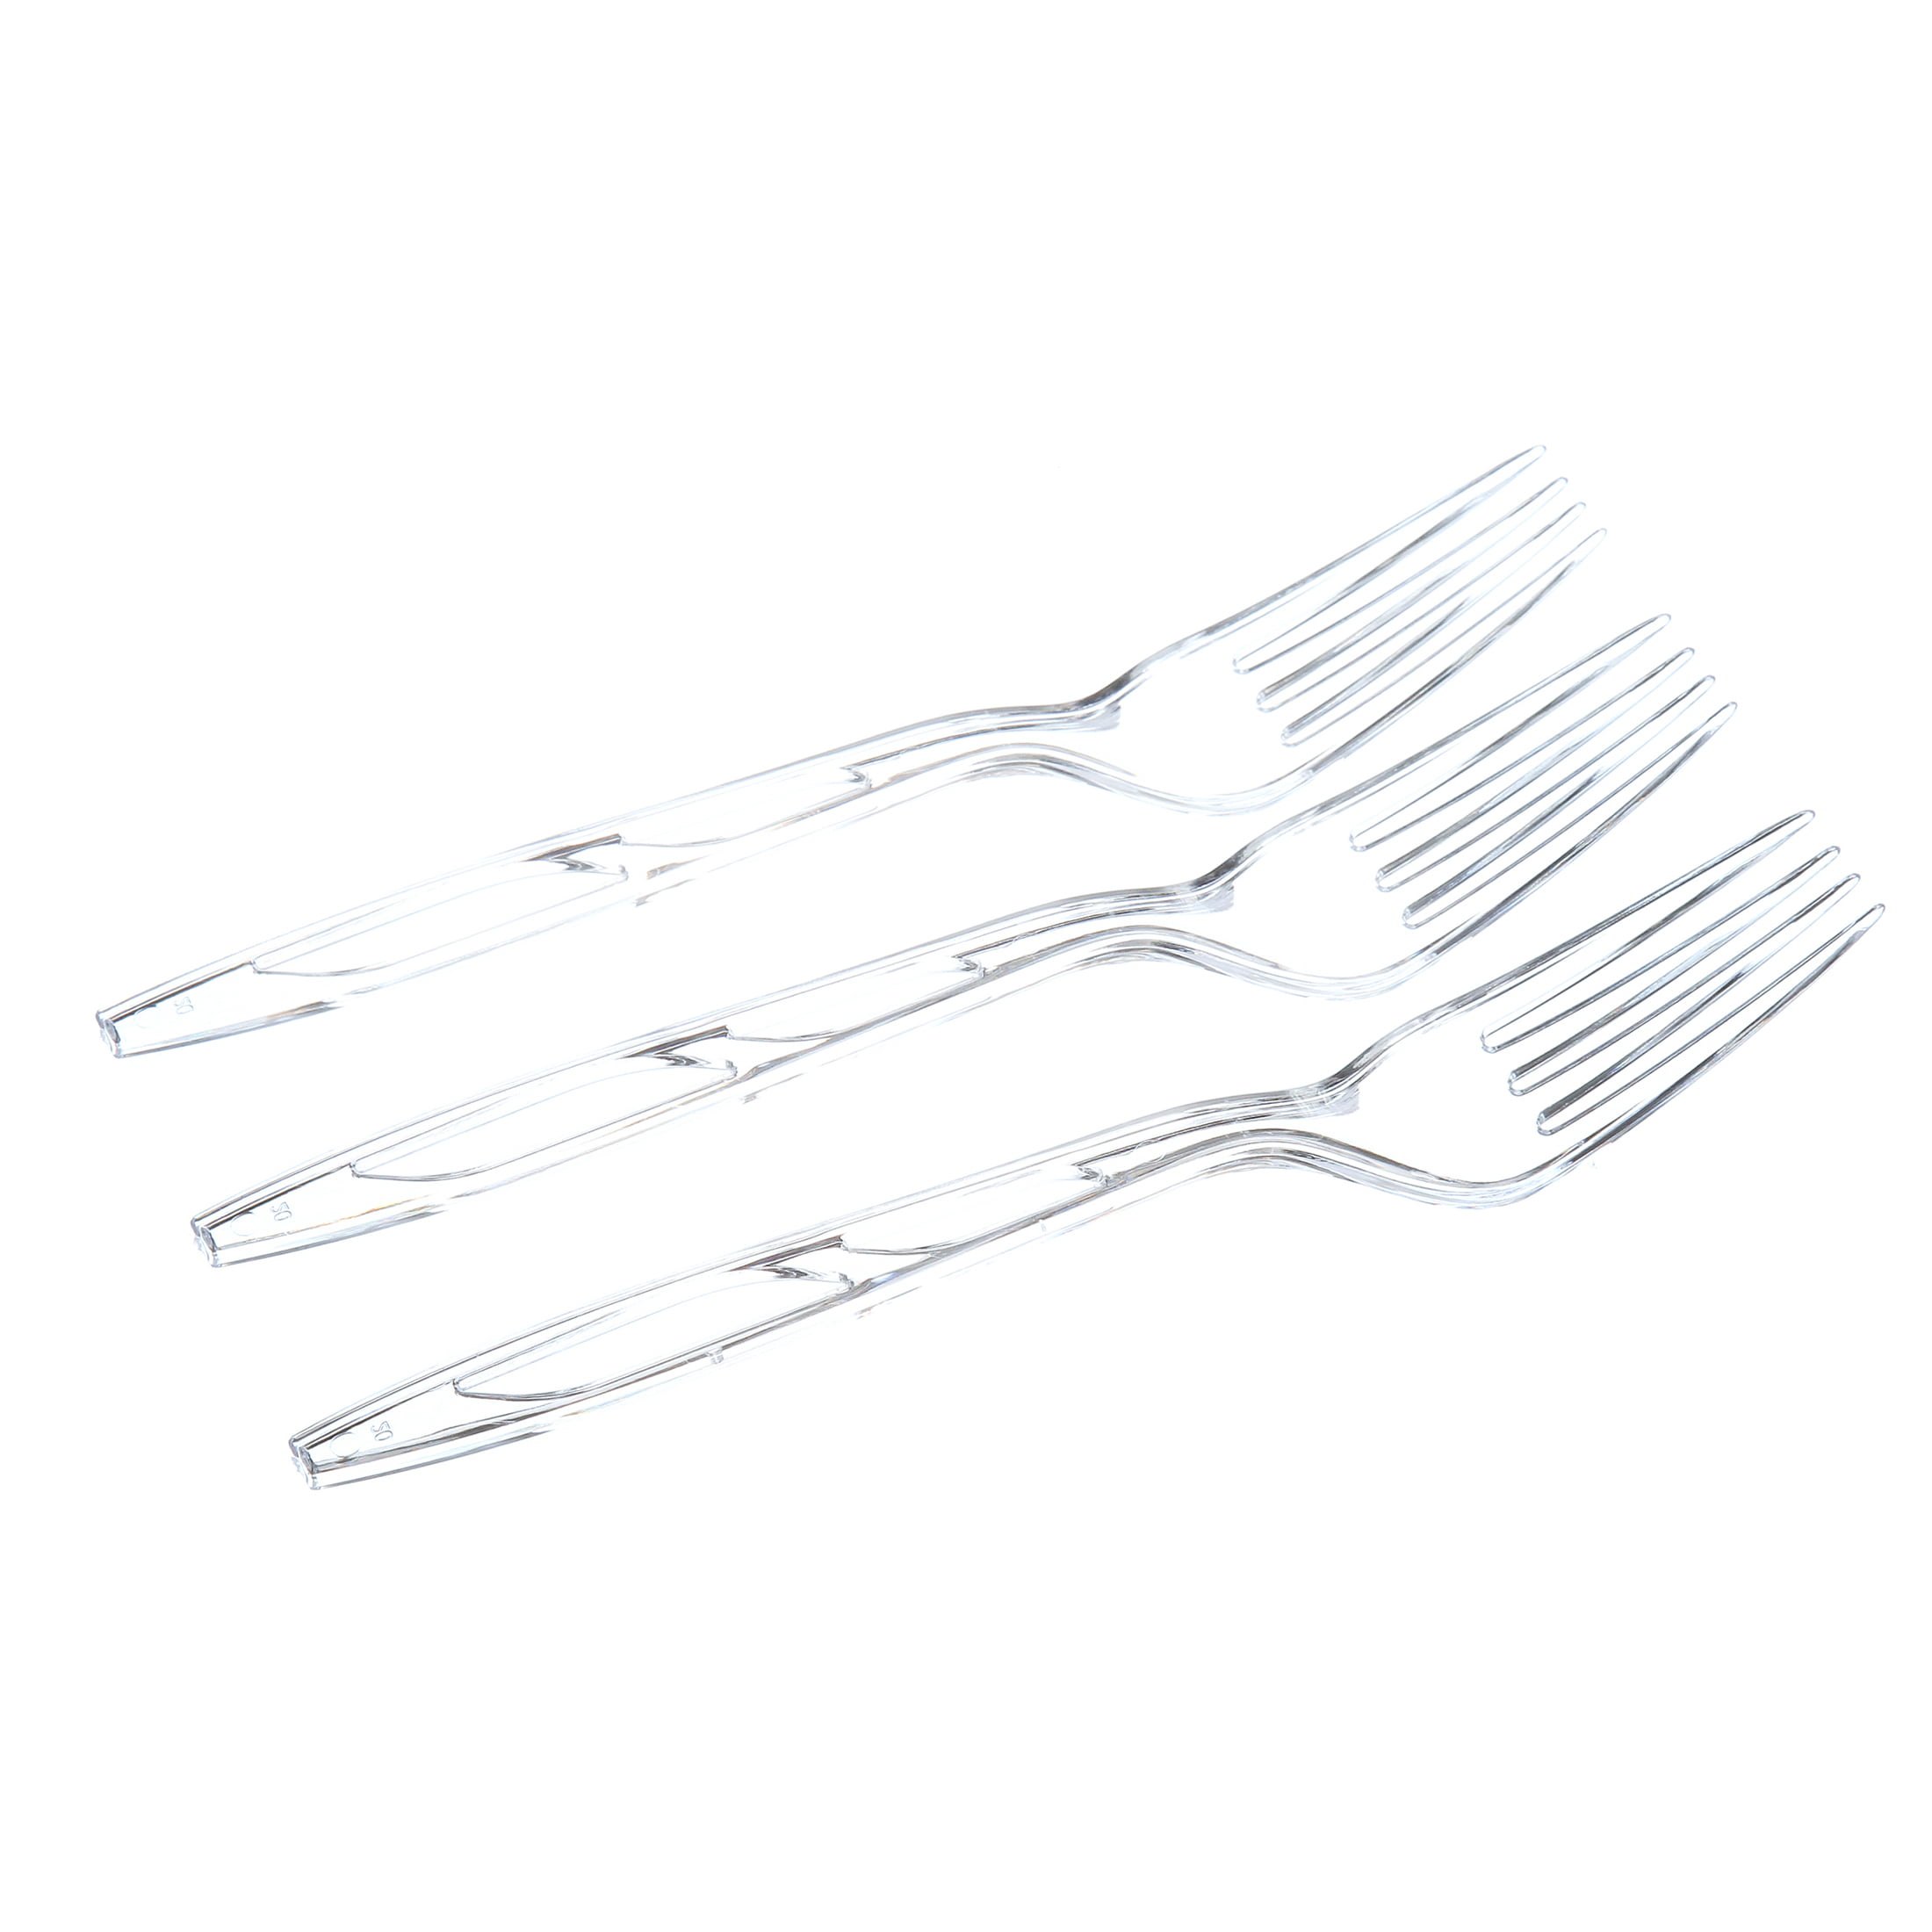 16 forks great for parties FREE DELIVERY 48 CLEAR ASSORTED RE-USEABLE PLASTIC CUTLERY SET 16 knives 16 spoons